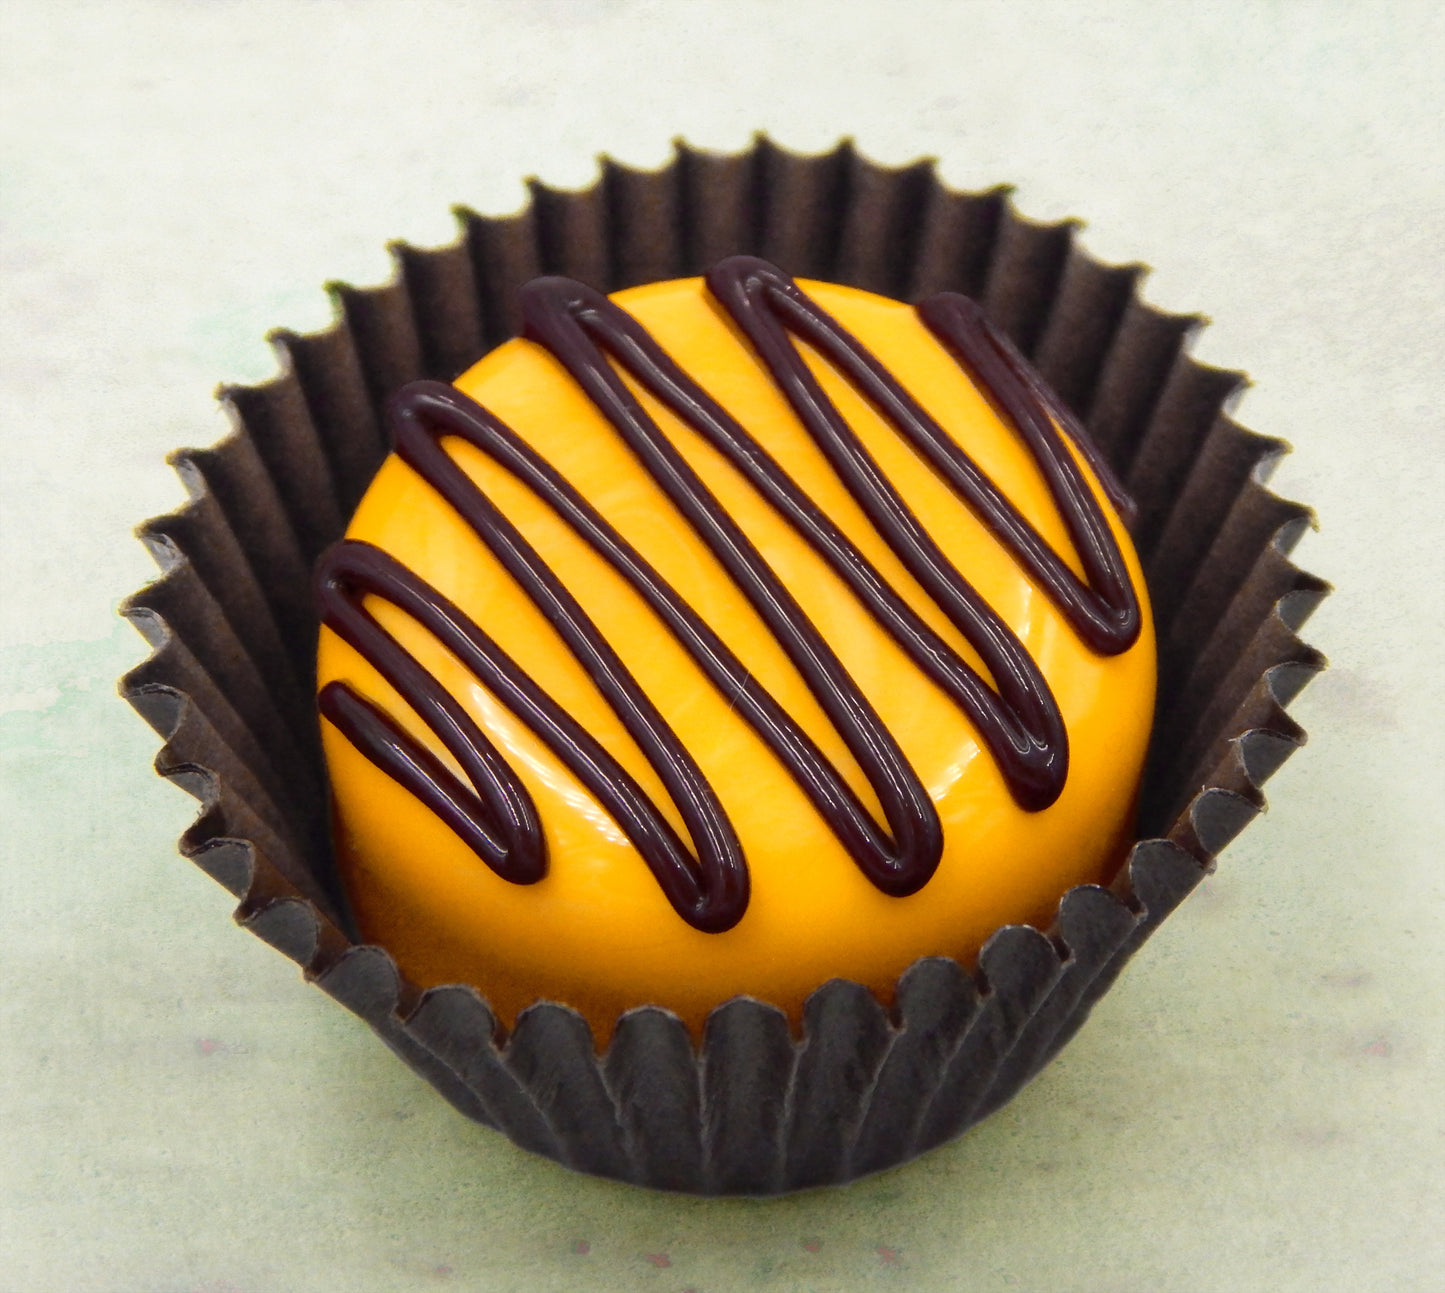 Chocolate Treat with Drizzle of Creamy Caramel (16-051+)